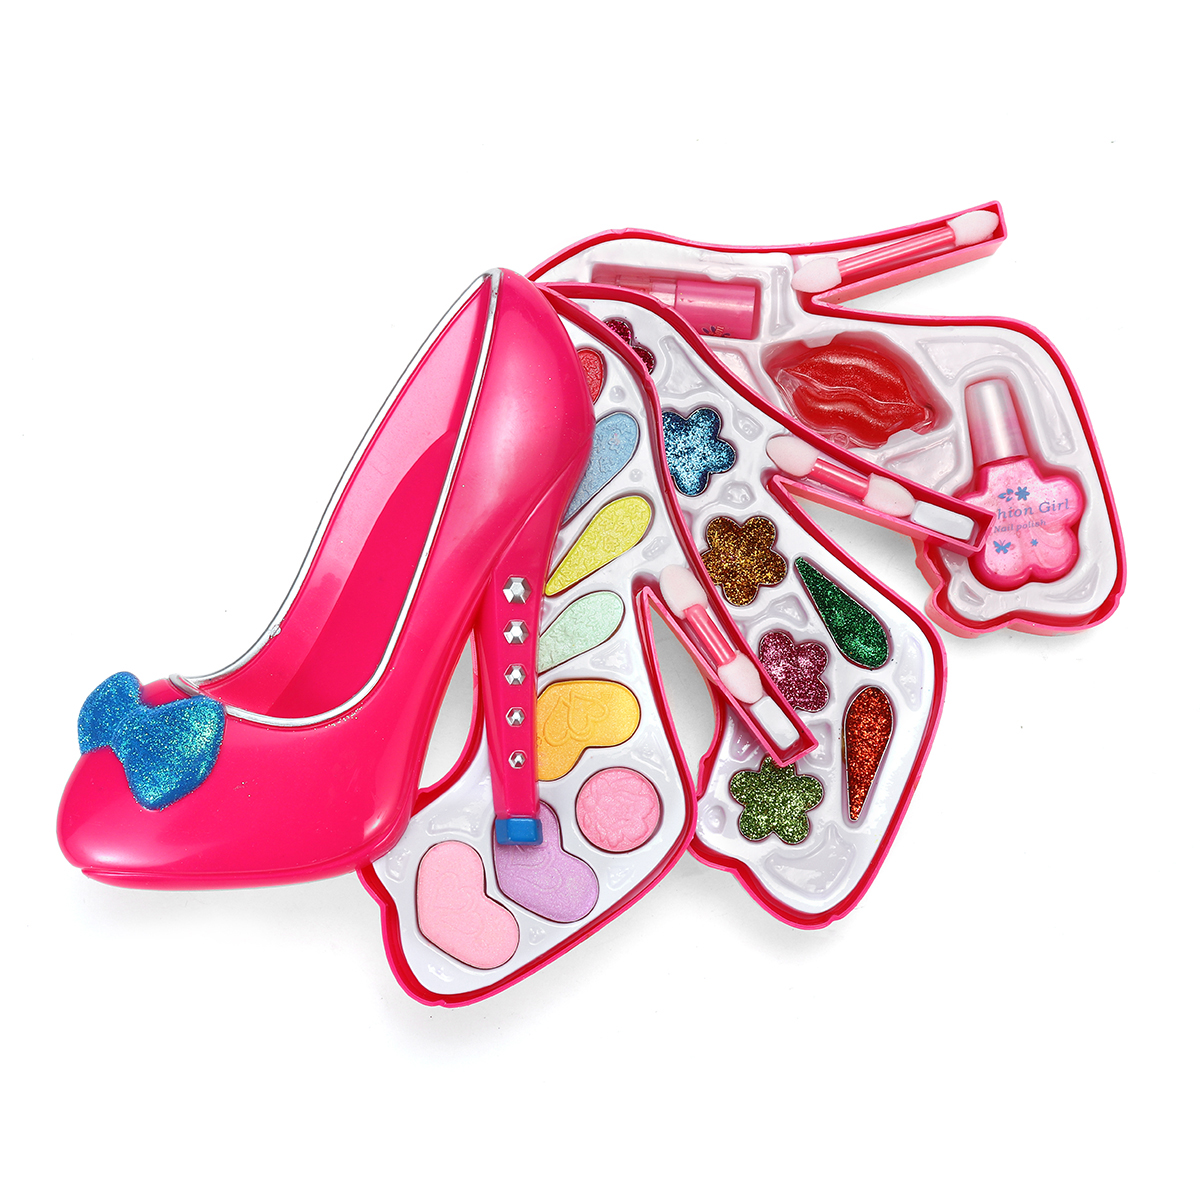 Kids-Girl-Makeup-Toy-Set-Non-Toxic-Cosmetic-High-Heel-Shape-Play-Kits-Children-Gift-for-Over-7-Years-1829485-9